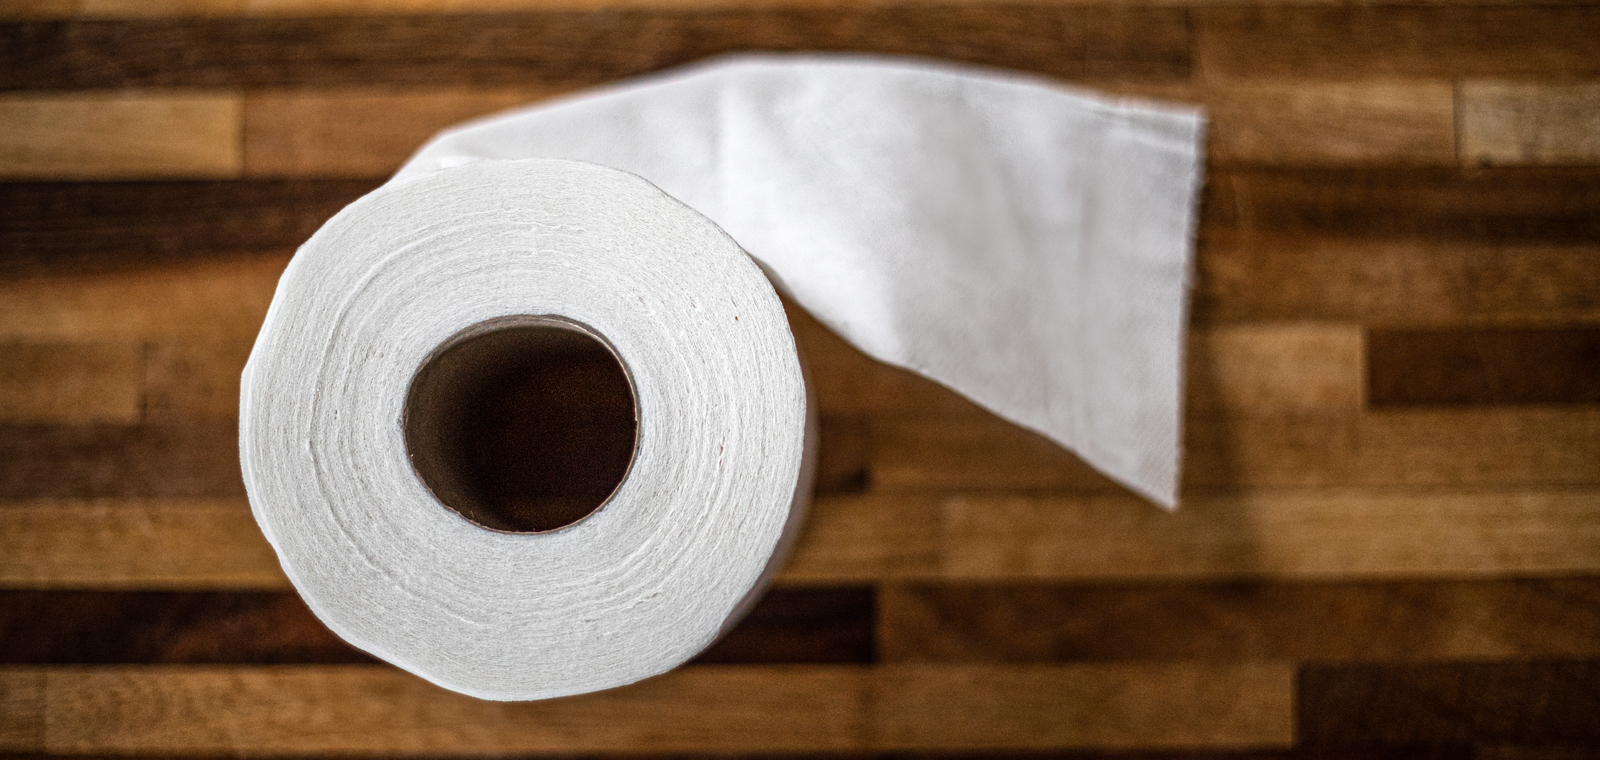 Why Should We Remember the Year of the Missing Toilet Paper?